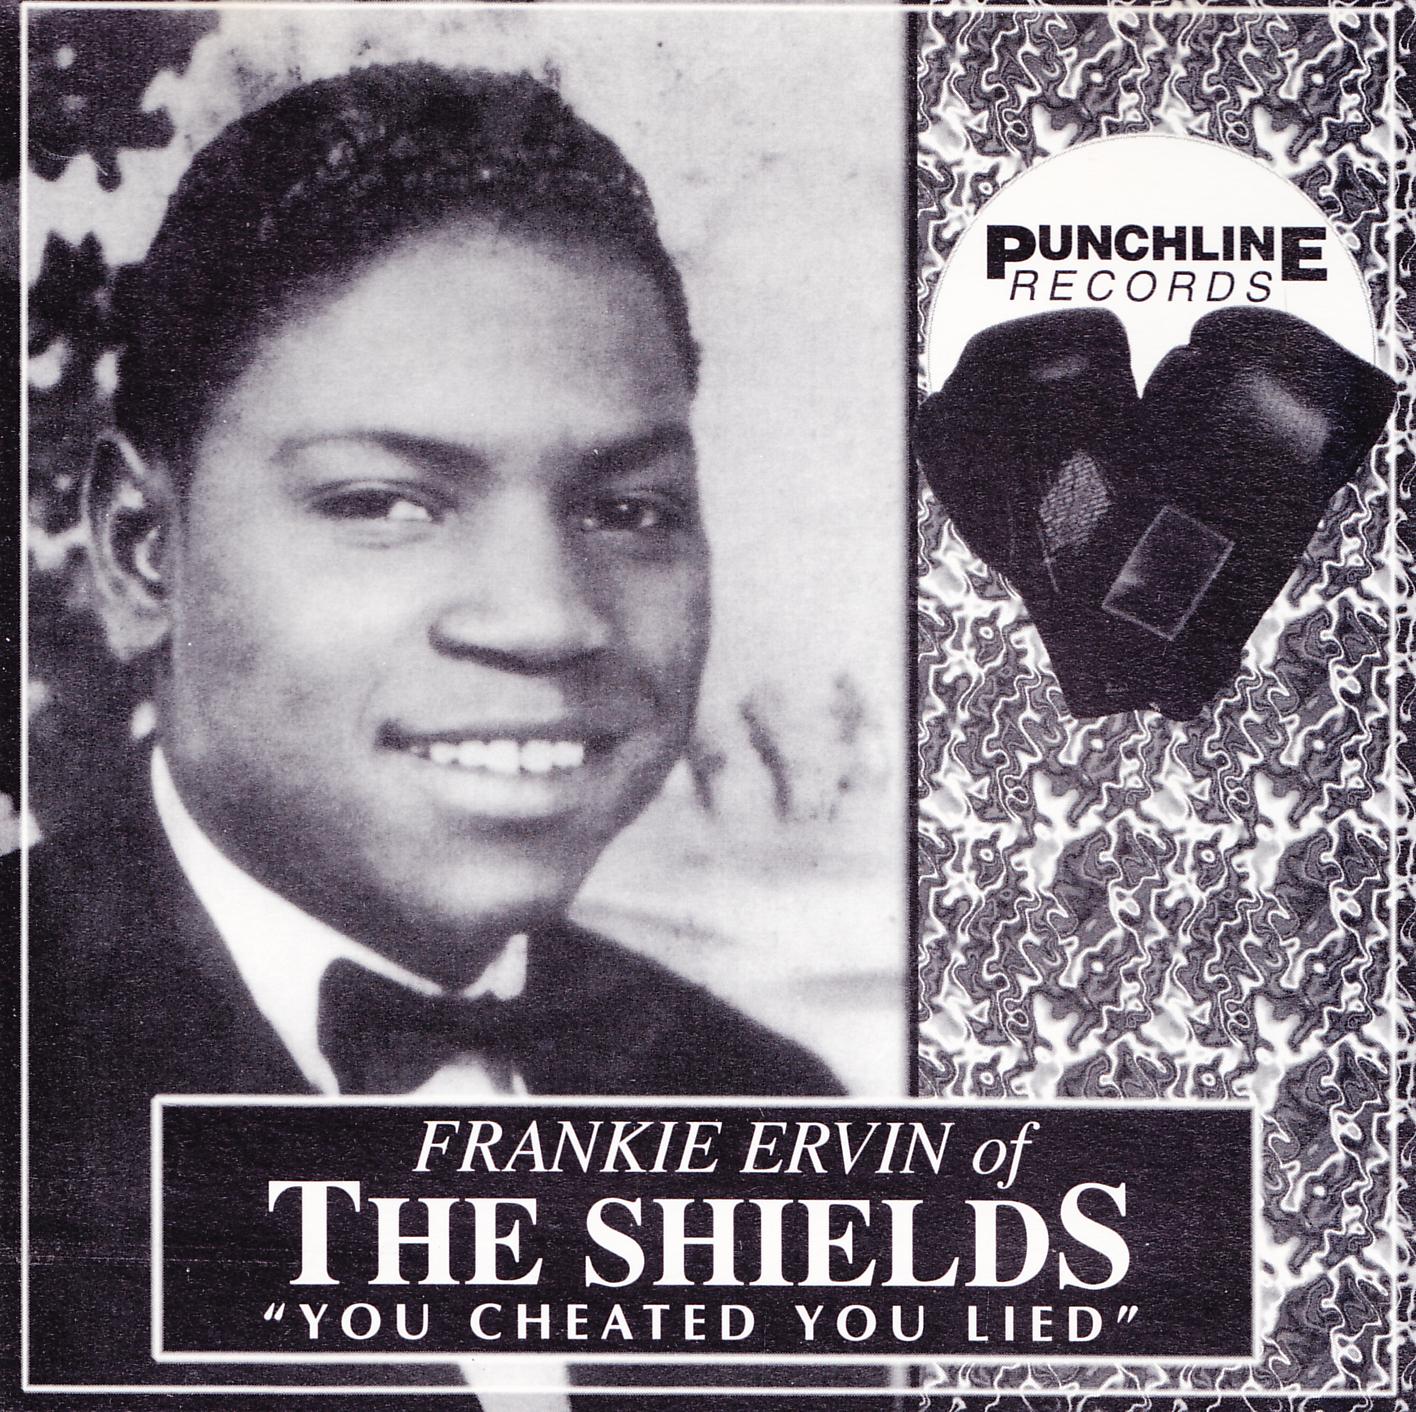 FROM THE VAULTS: Frankie Ervin born 27 March 1926